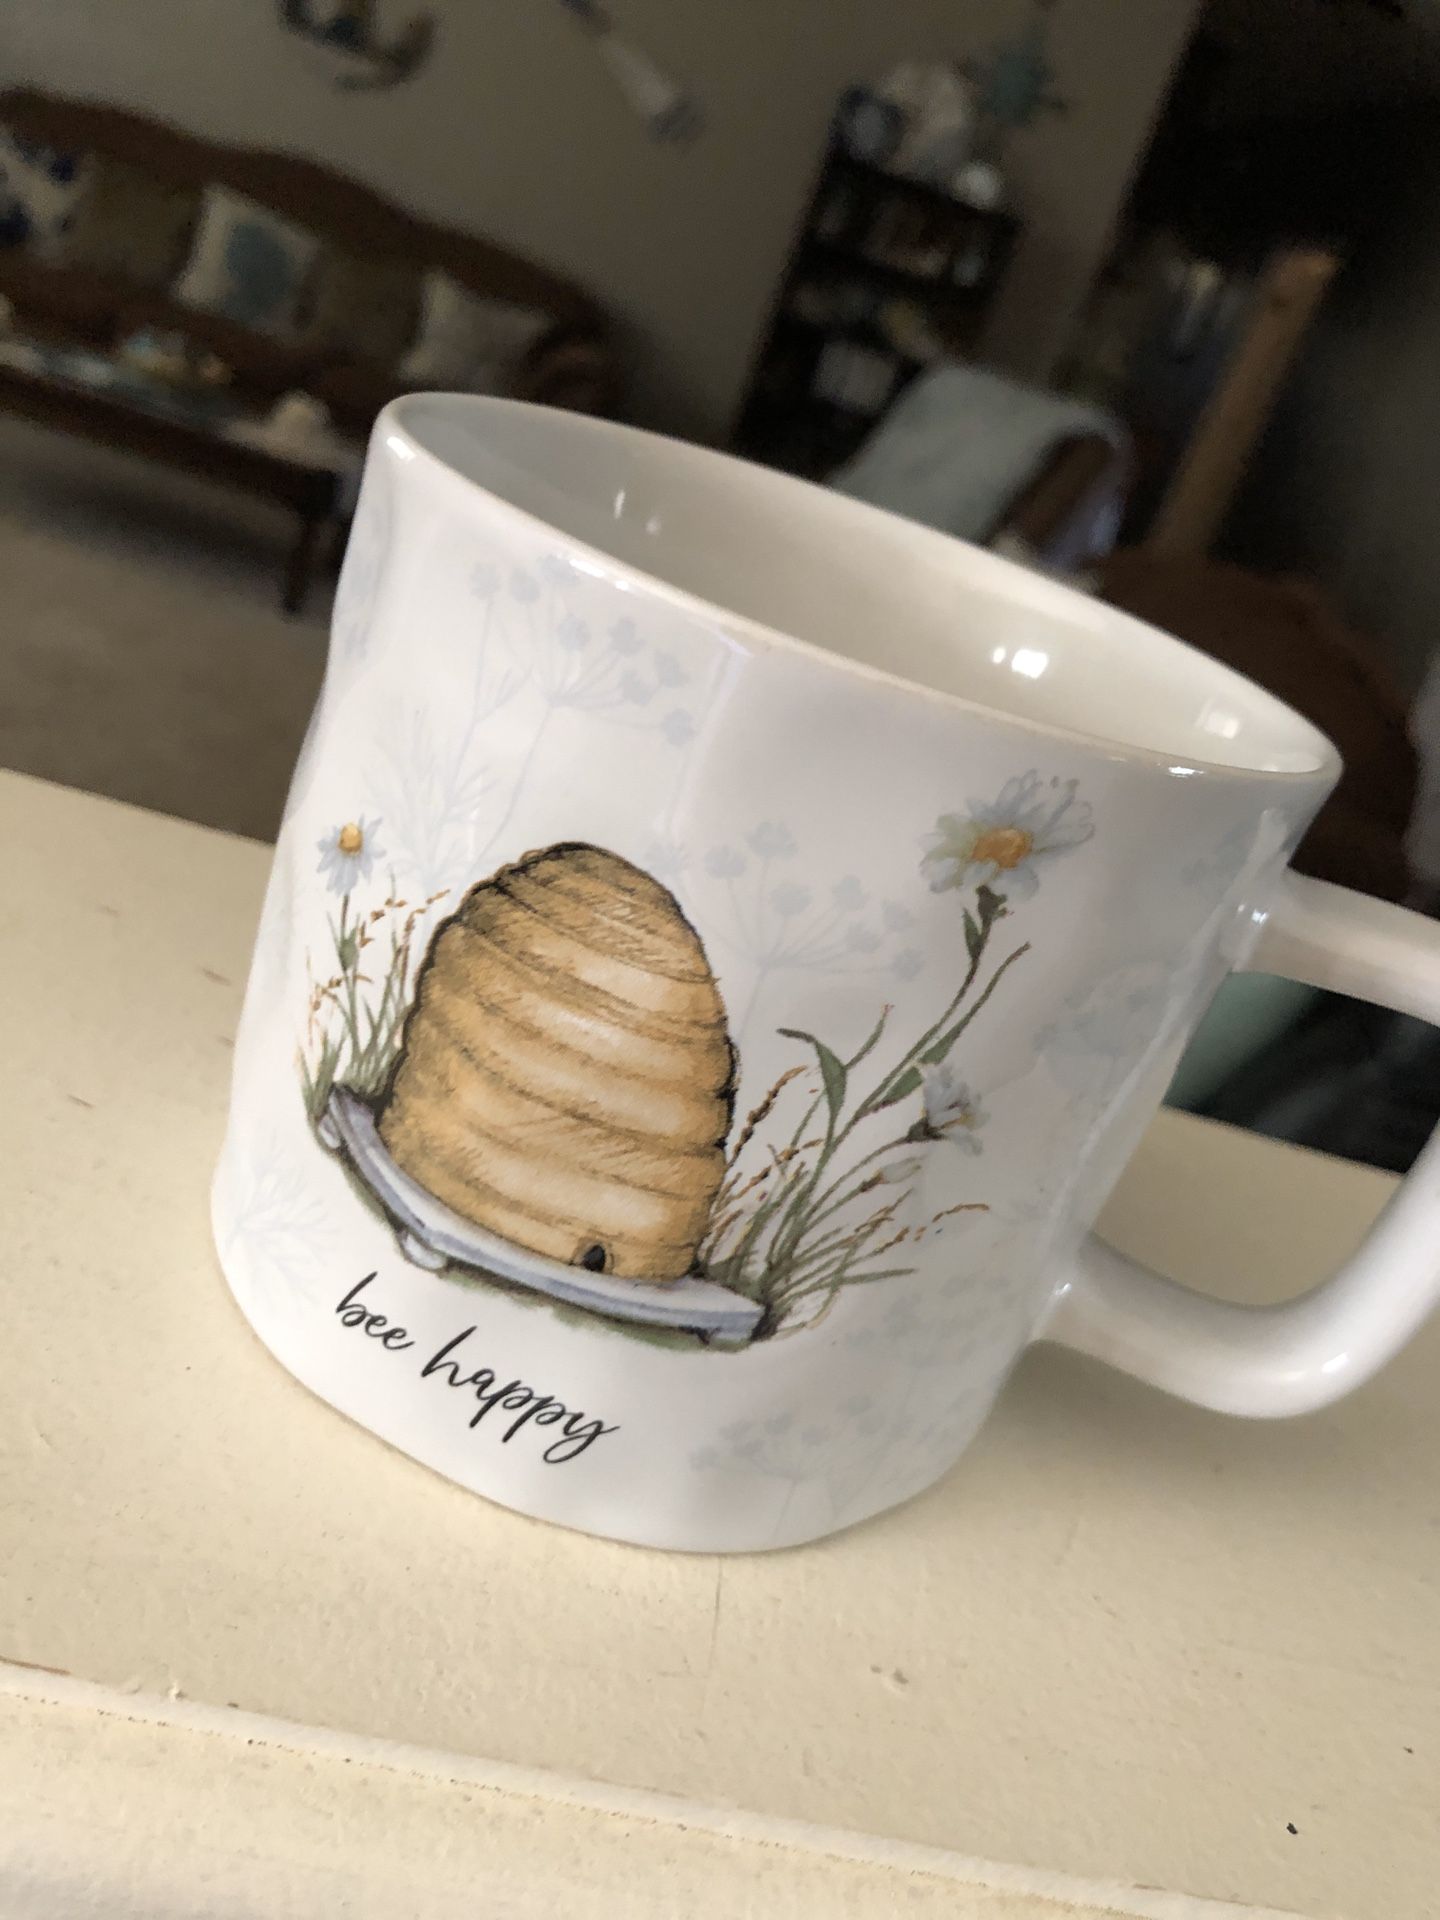 Cute Bumble Bee Hive coffee mug - pairs well with Rae Dunn - New $4 local pick up